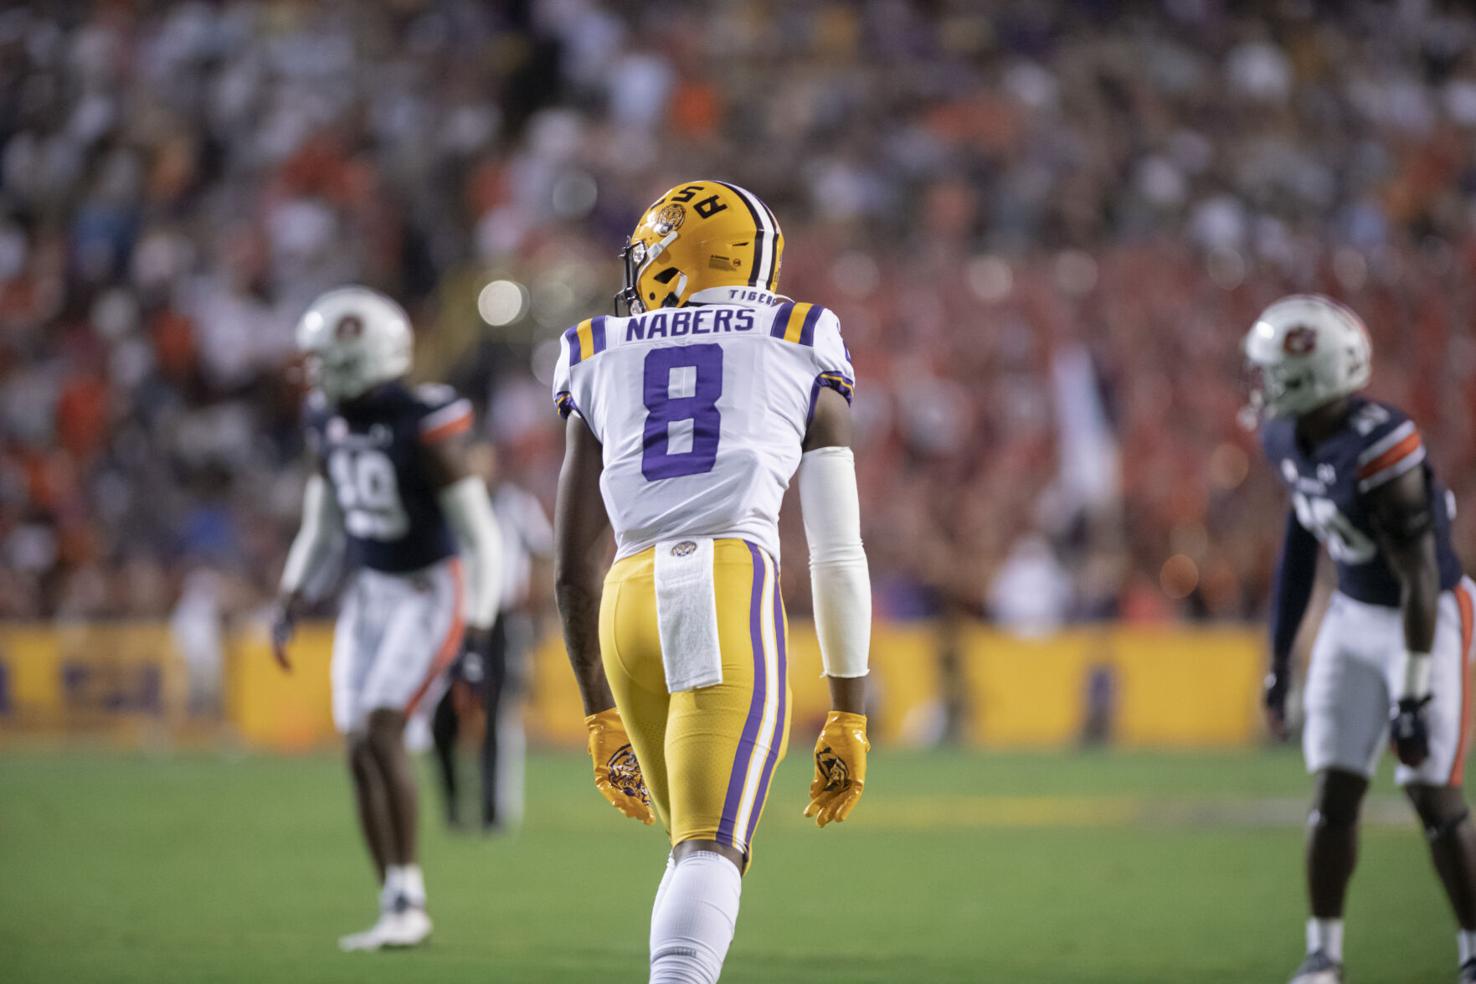 The Reveille Sports Staff makes its predictions for LSU vs. Auburn